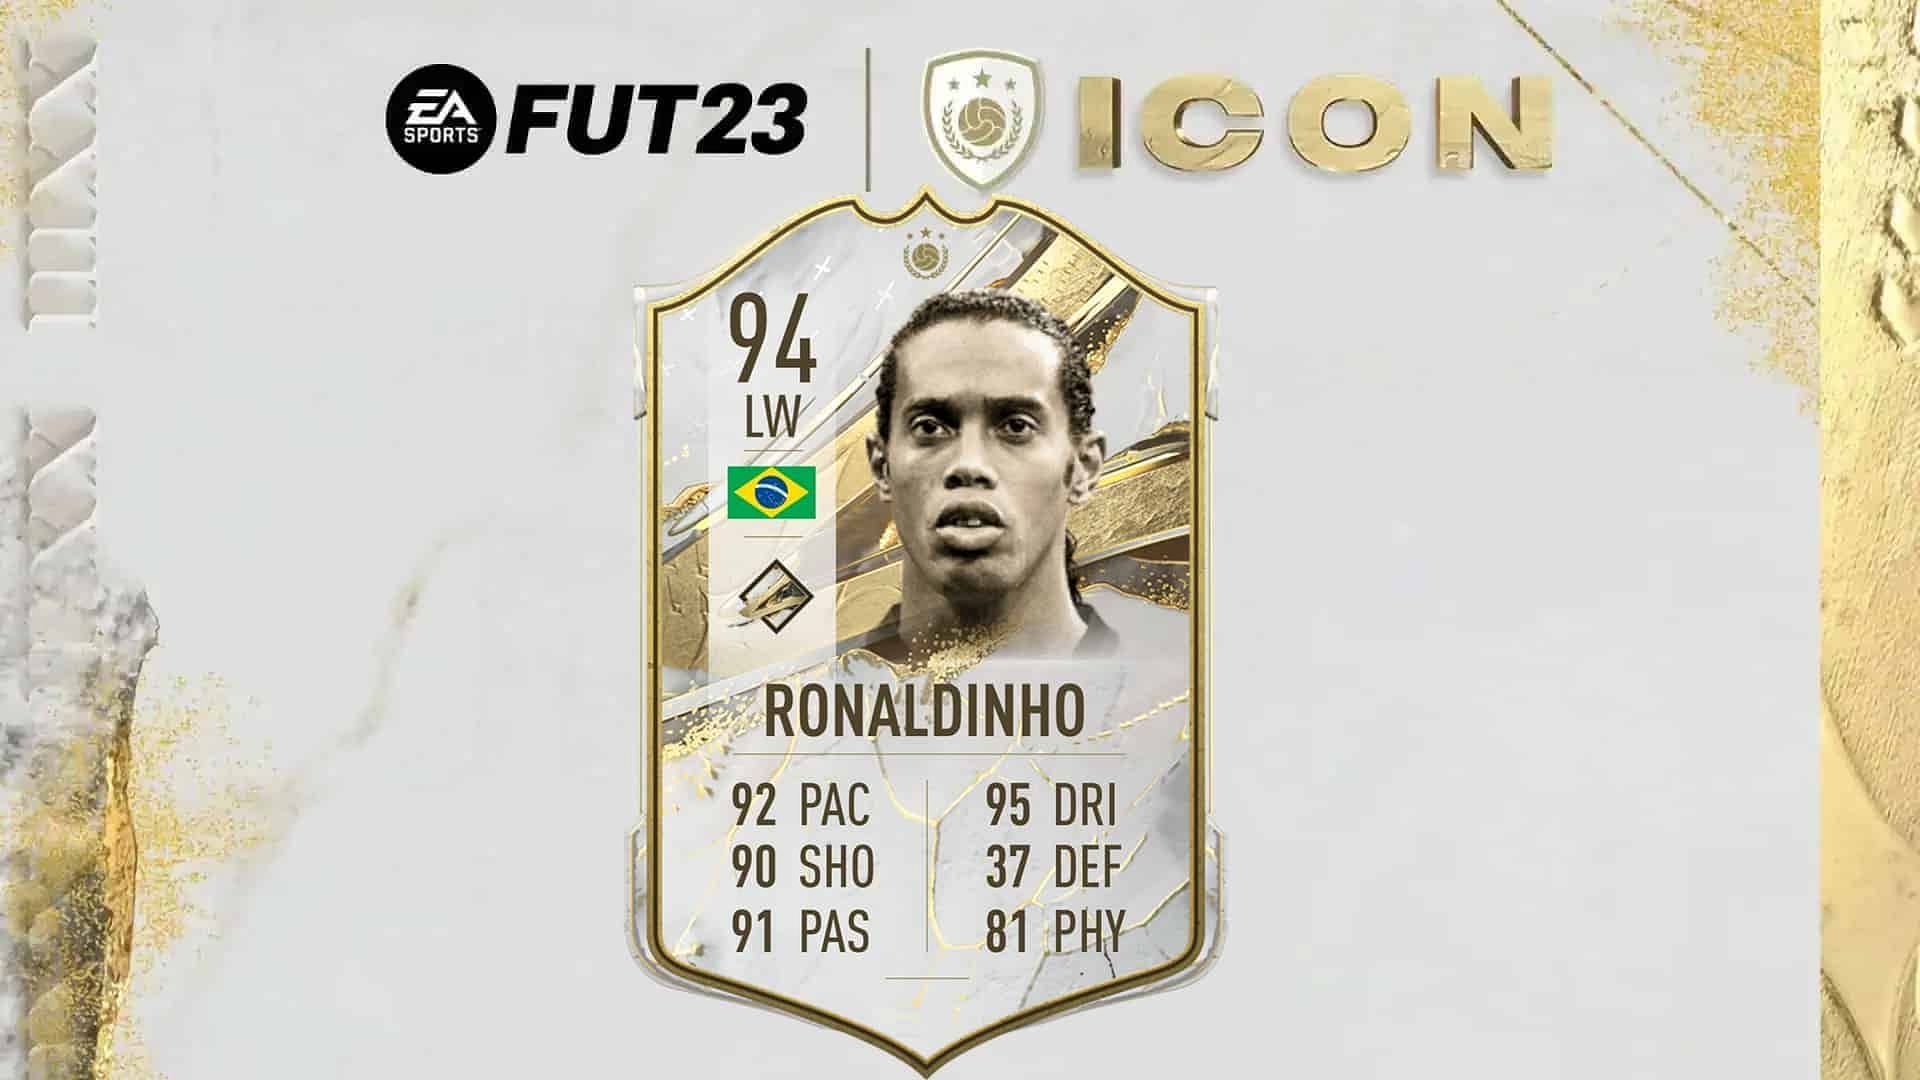 The Ronaldinho Prime Icon SBC is one of the most expensive releases in FIFA 23 (Image via EA Sports)